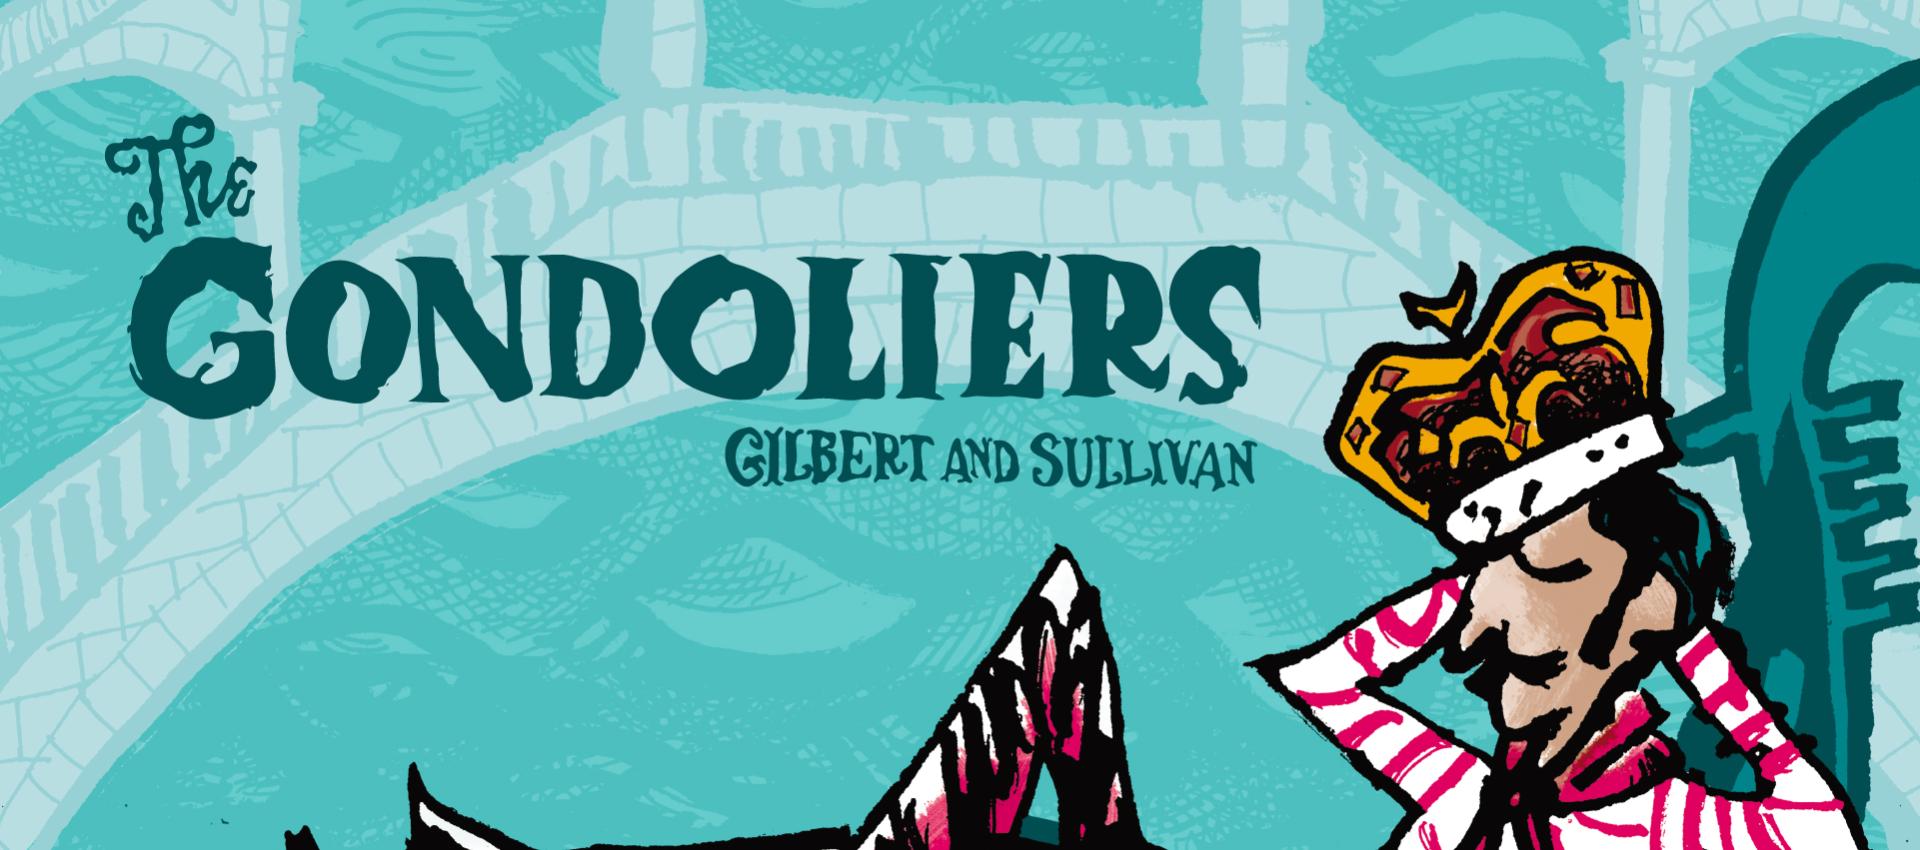 The Gondoliers illustrated banner